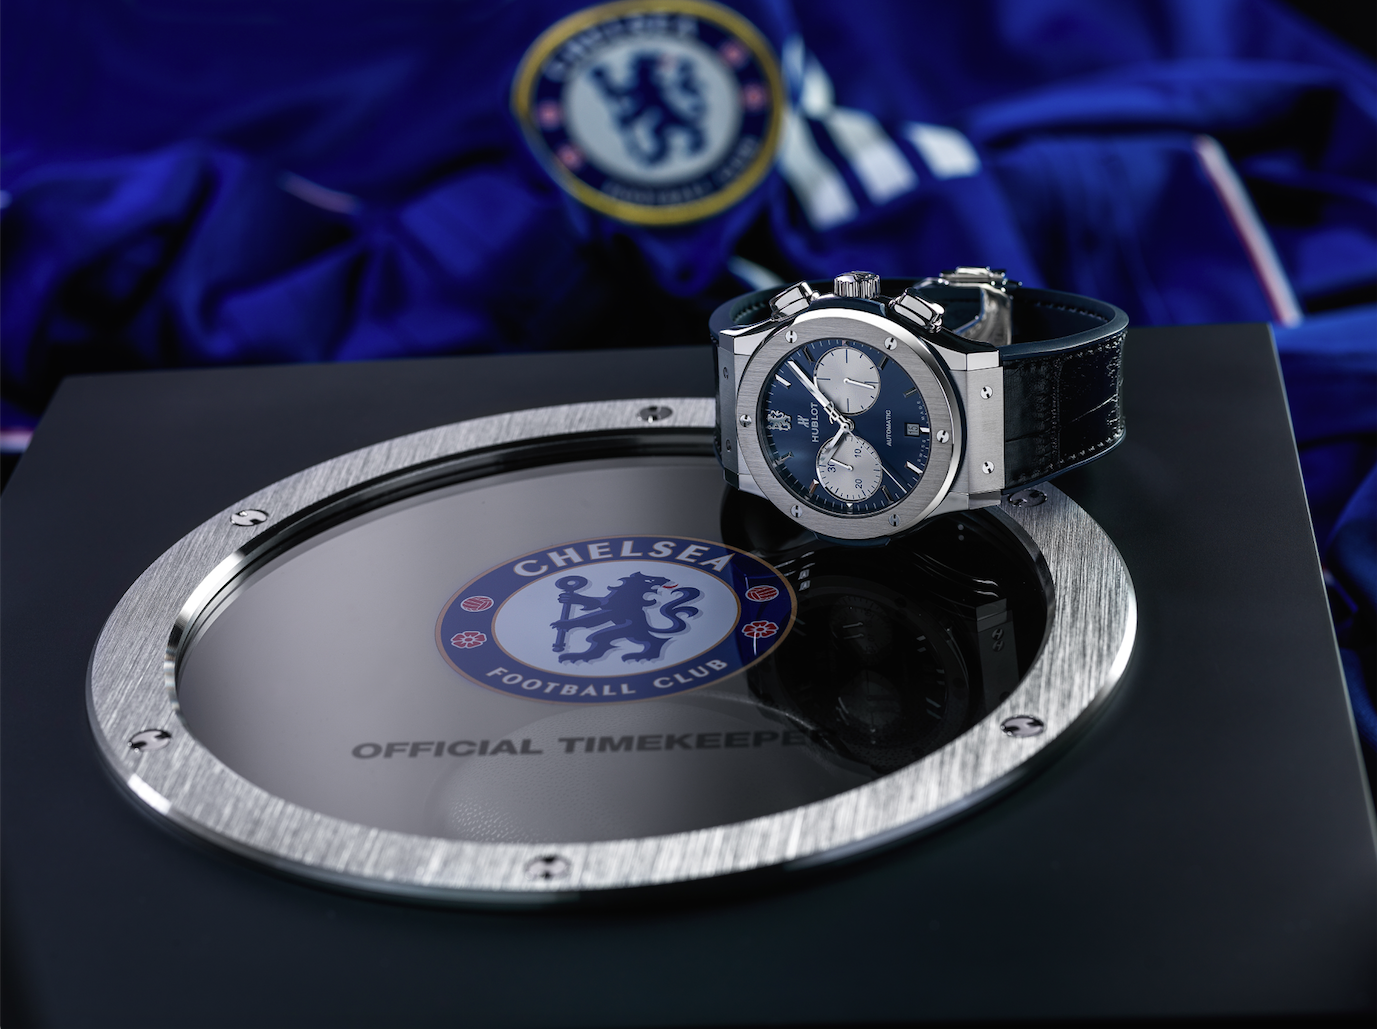 Hublot Honors Chelsea Football Club With The Classic Fusion Chronograph Chelsea